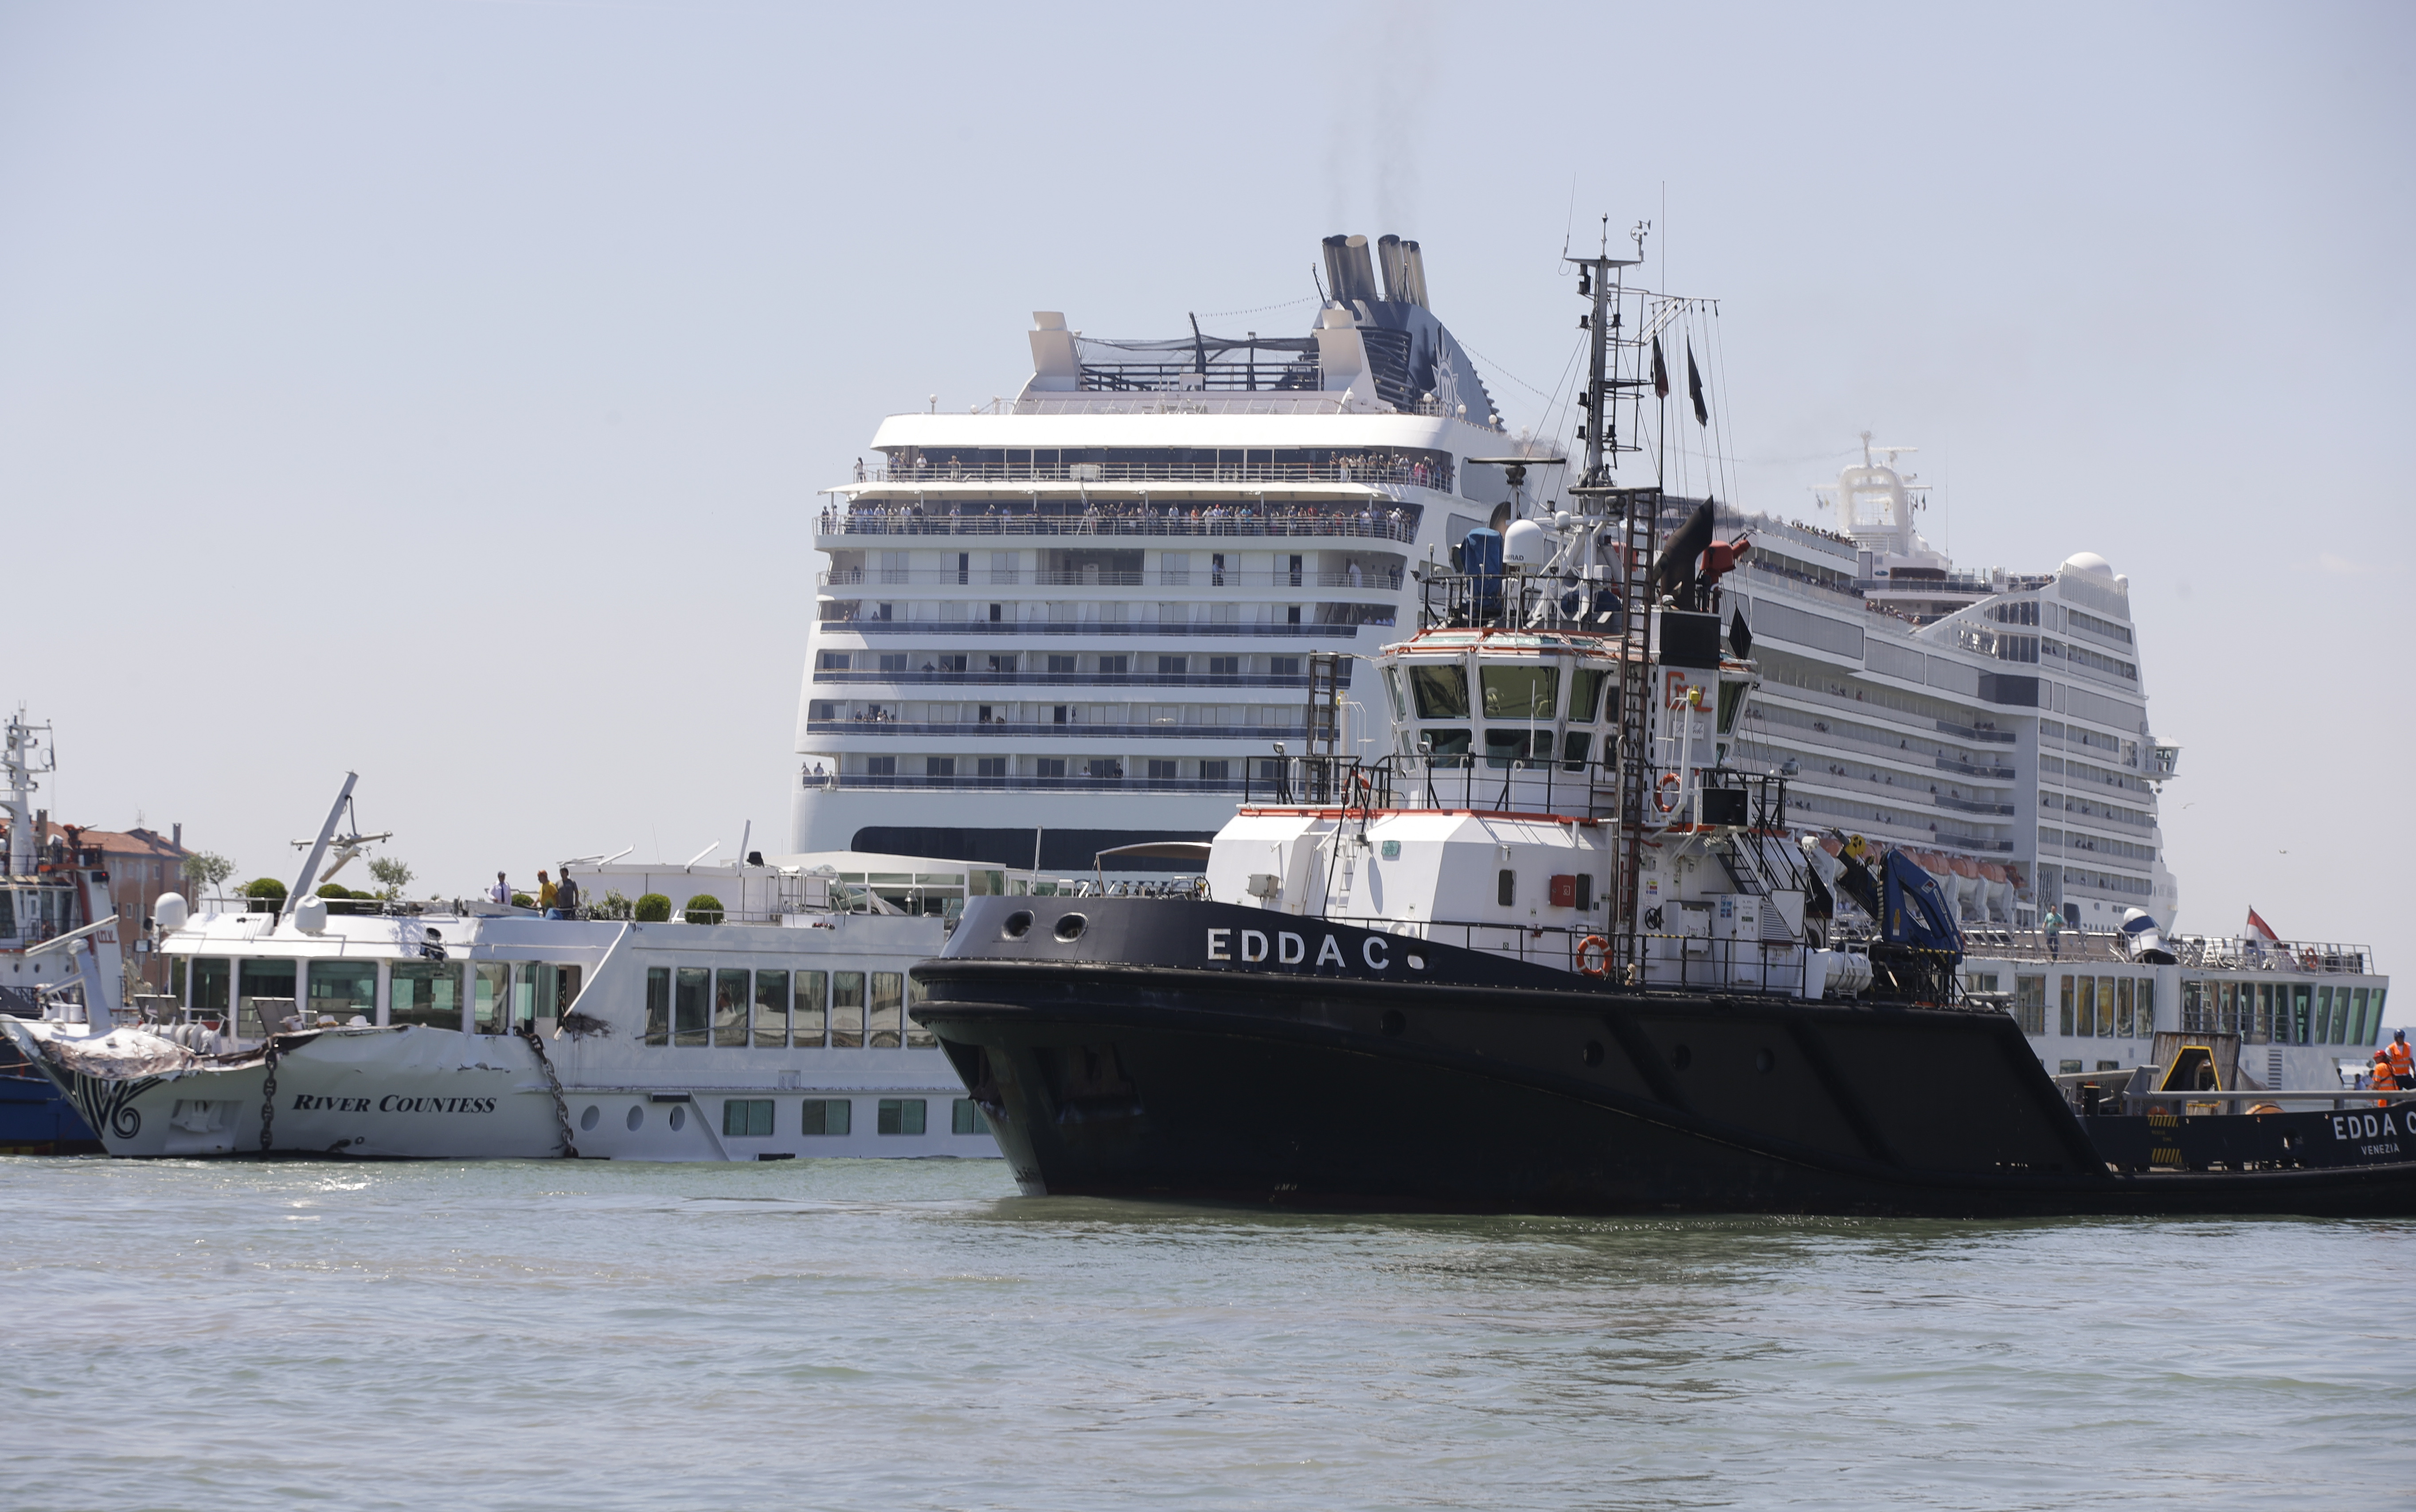 A tourist river boat, left, is dwarfed by the MSC Magnifica cruise ship passing by, in Venice, Italy, Sunday, June 2, 2019. The towering cruise ship MSC Opera has struck a dock and a tourist river boat on a busy canal in Venice. Italian media report that at least five people have been injured in the crash. (AP Photo/Luca Bruno)